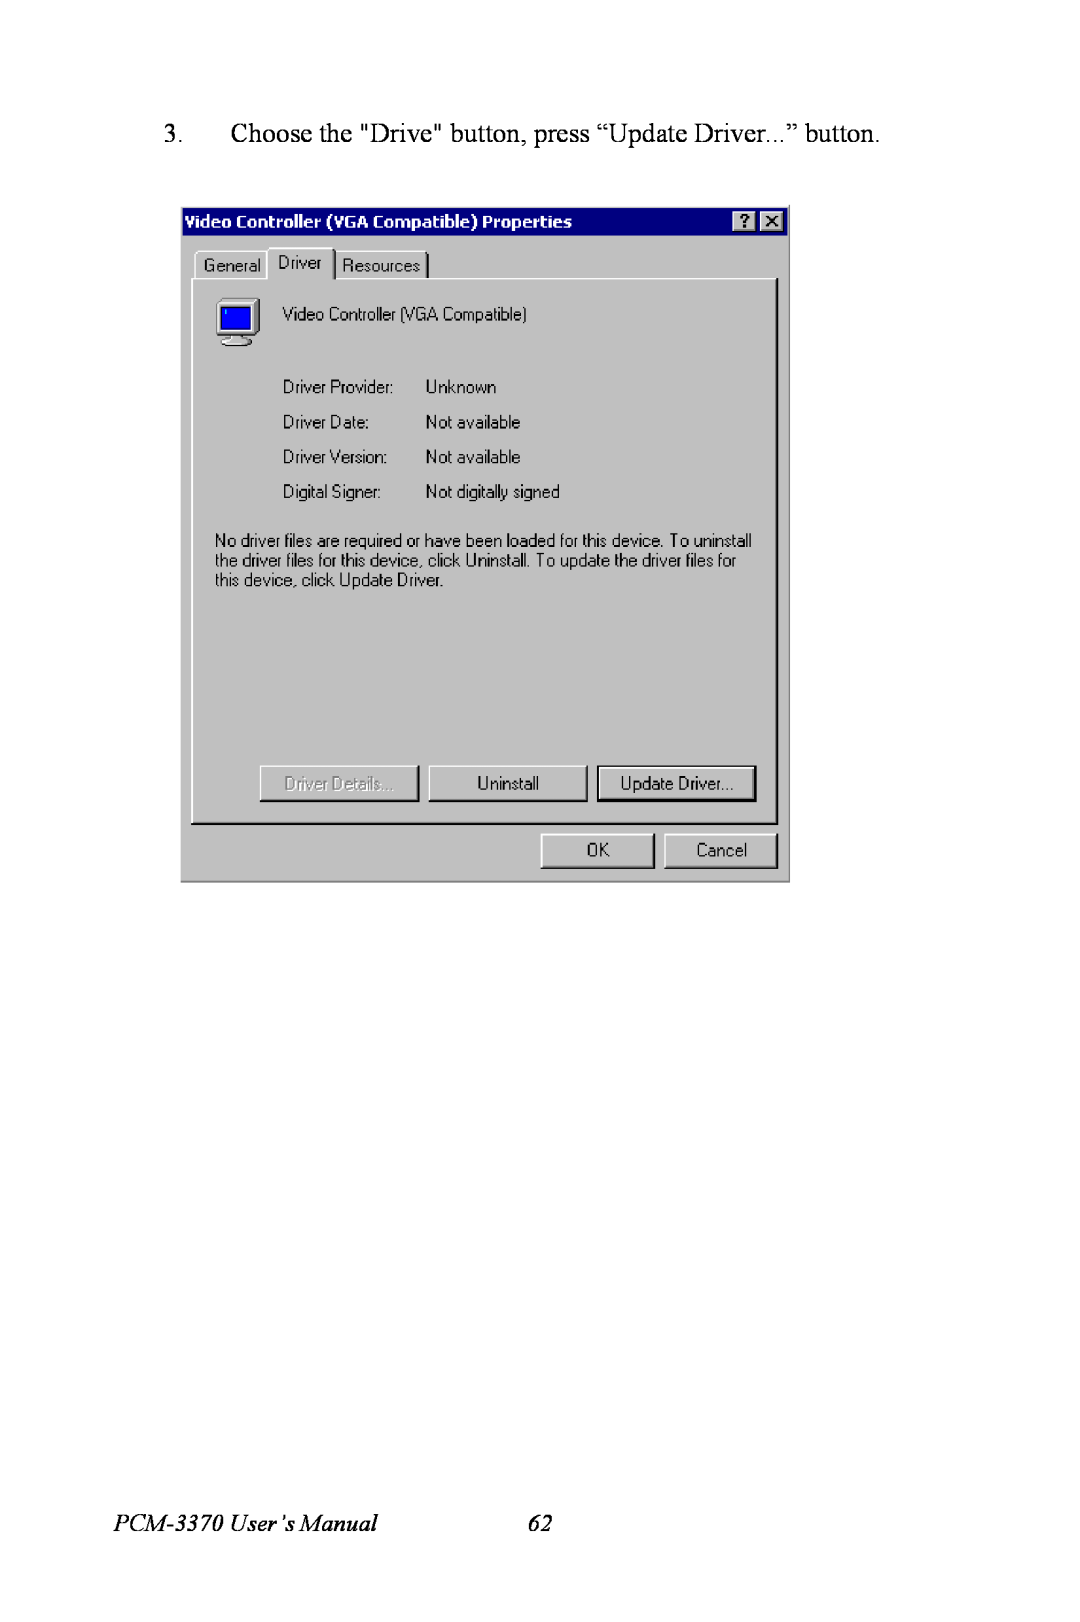 Intel user manual Choose the Drive button, press “Update Driver...” button, PCM-3370 User’s Manual 